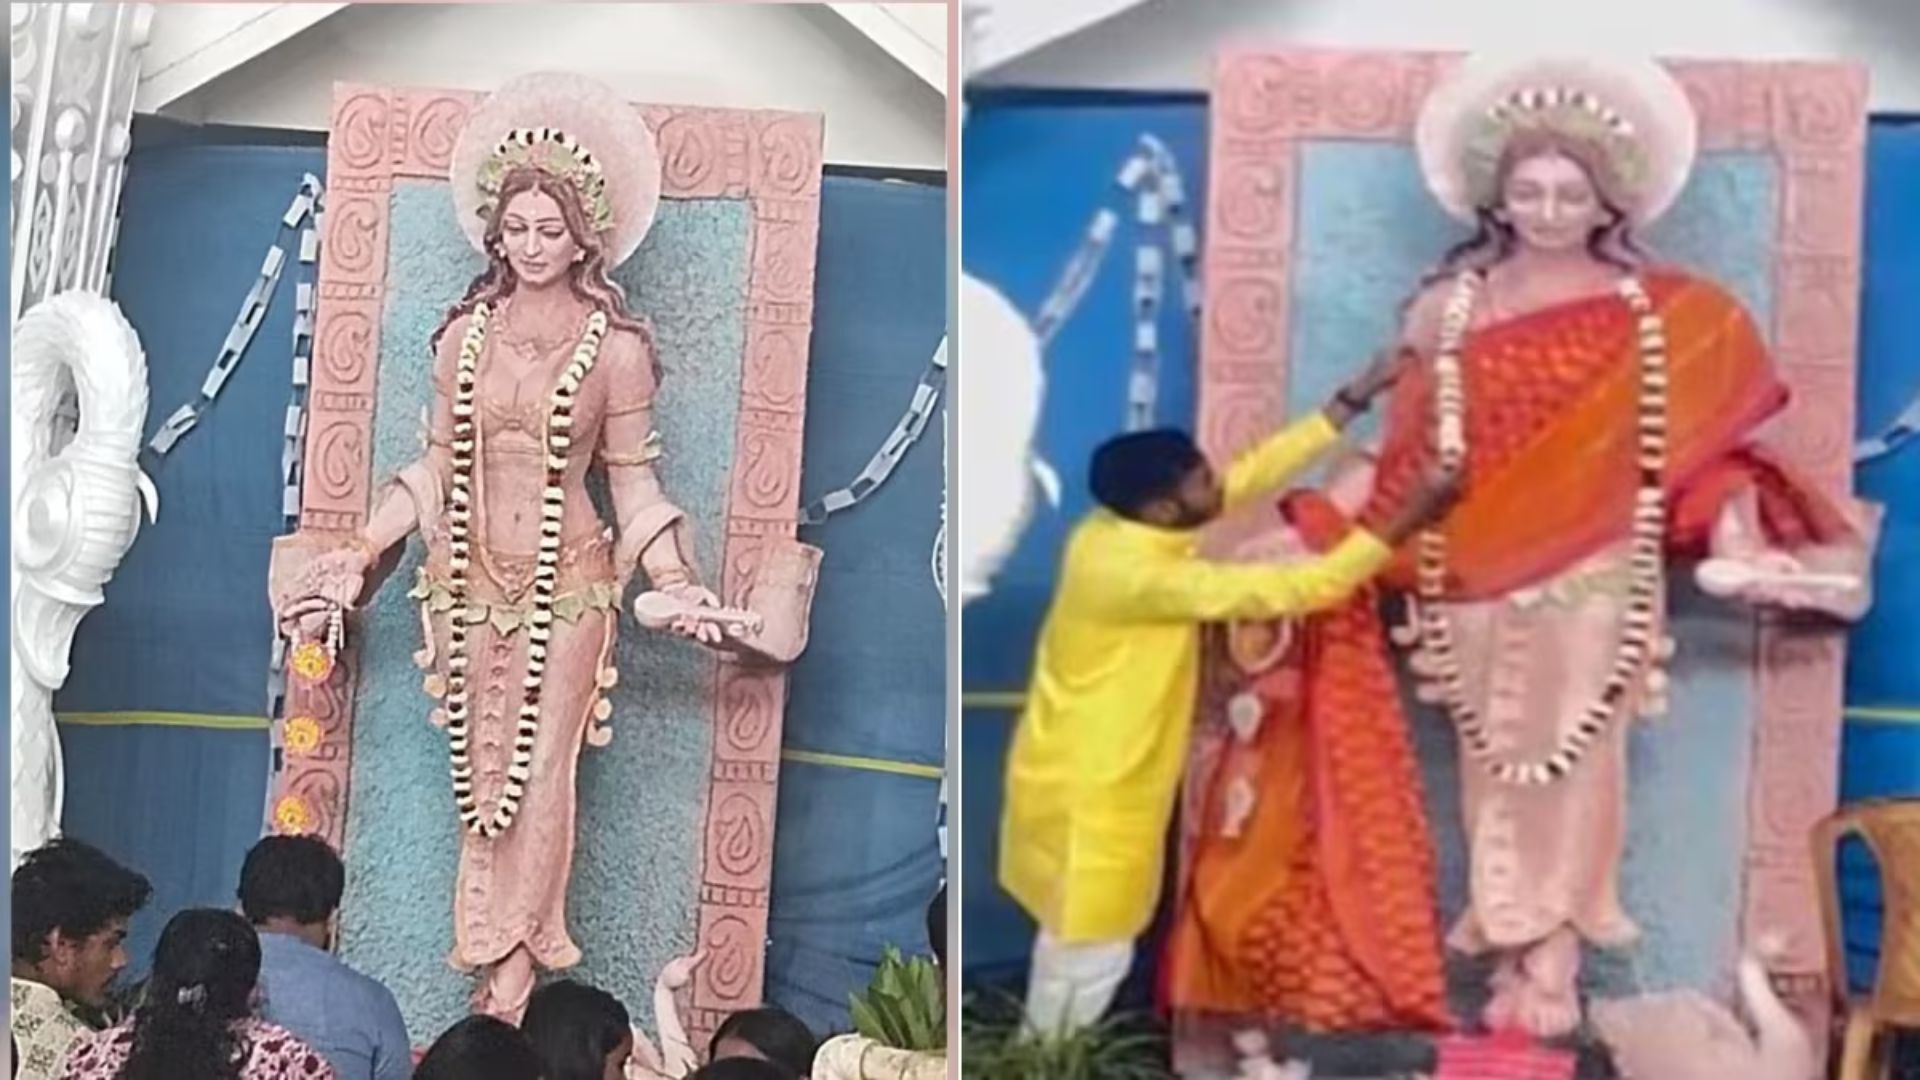 ABVP Demands Action Against Tripura College Over Saraswati Idol Controversy